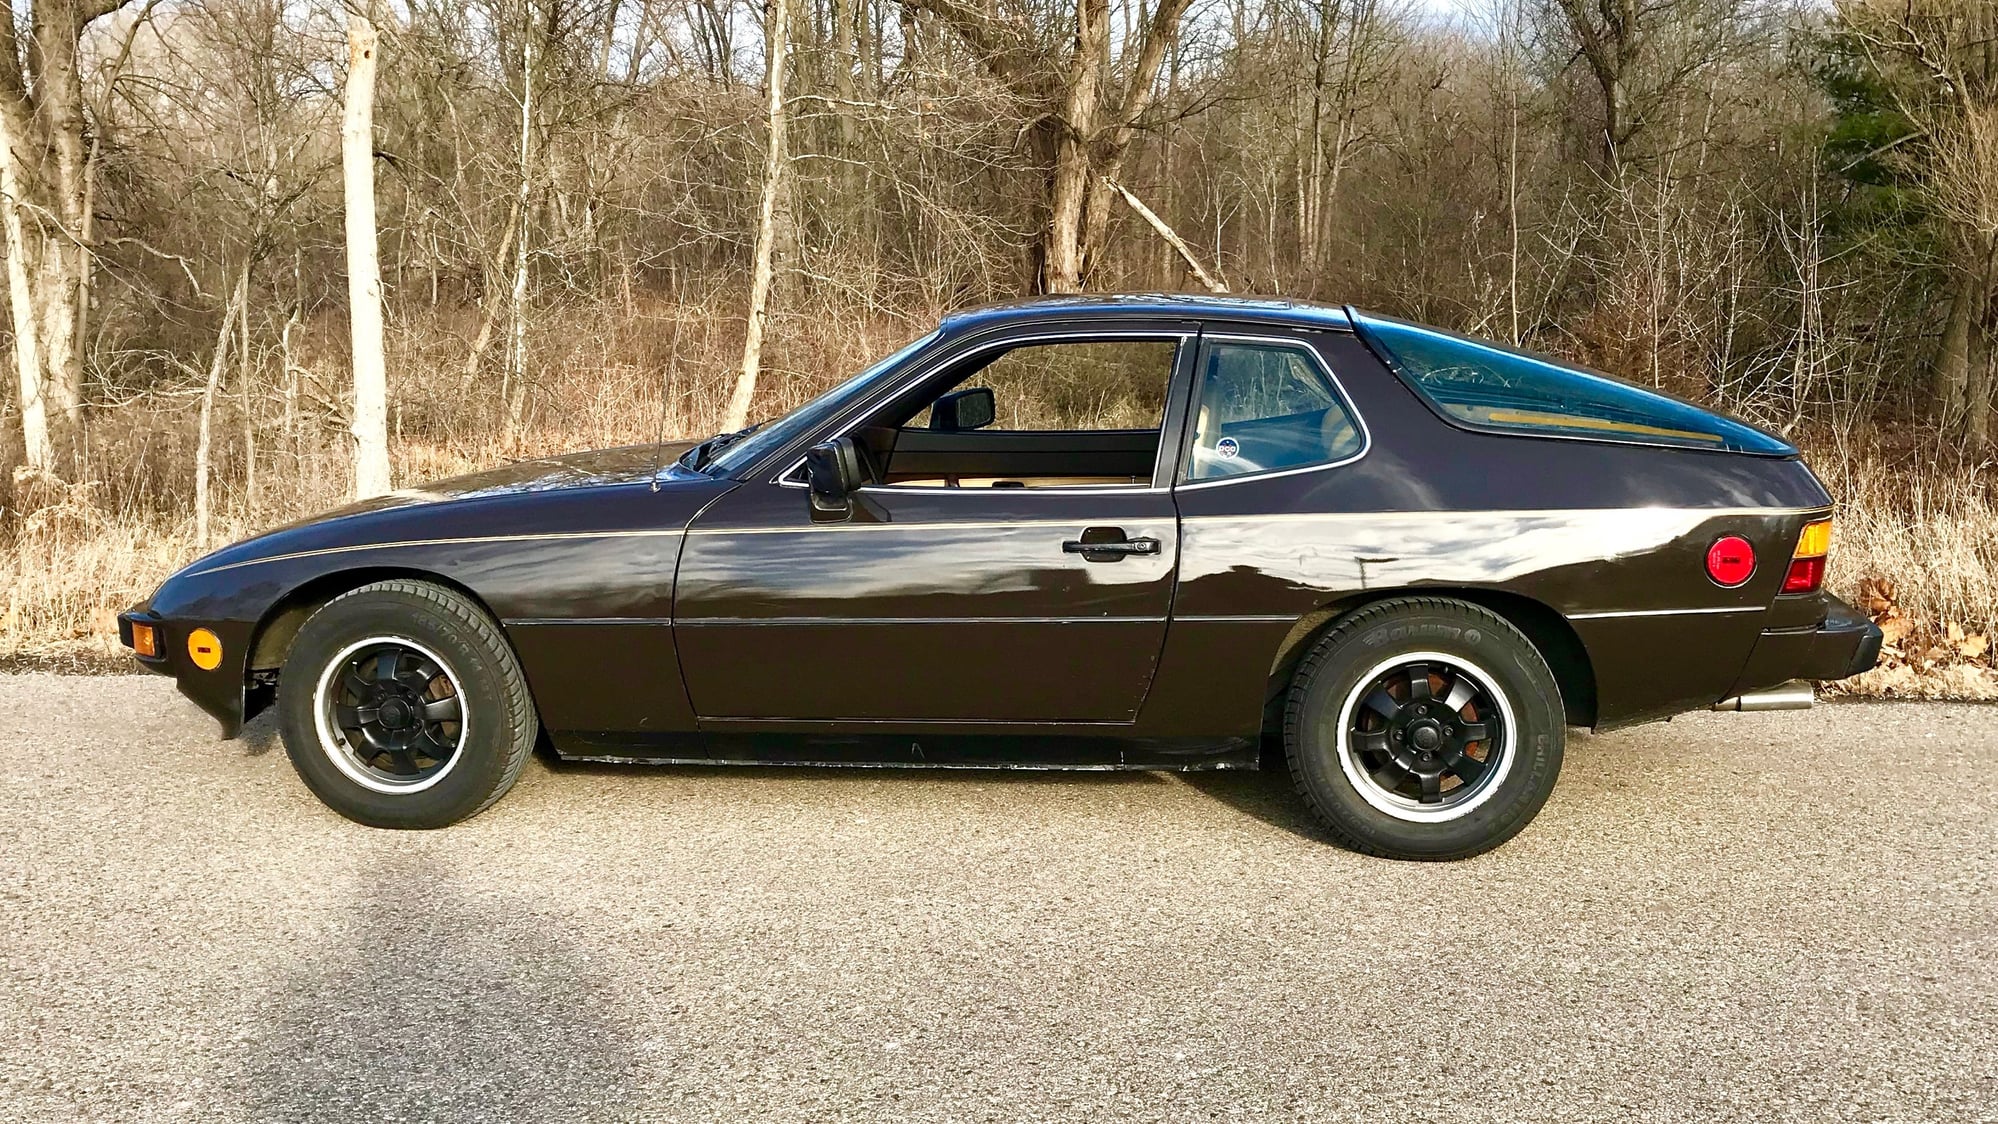 Porsche 924, 1979 A Nice One, With a Real Story